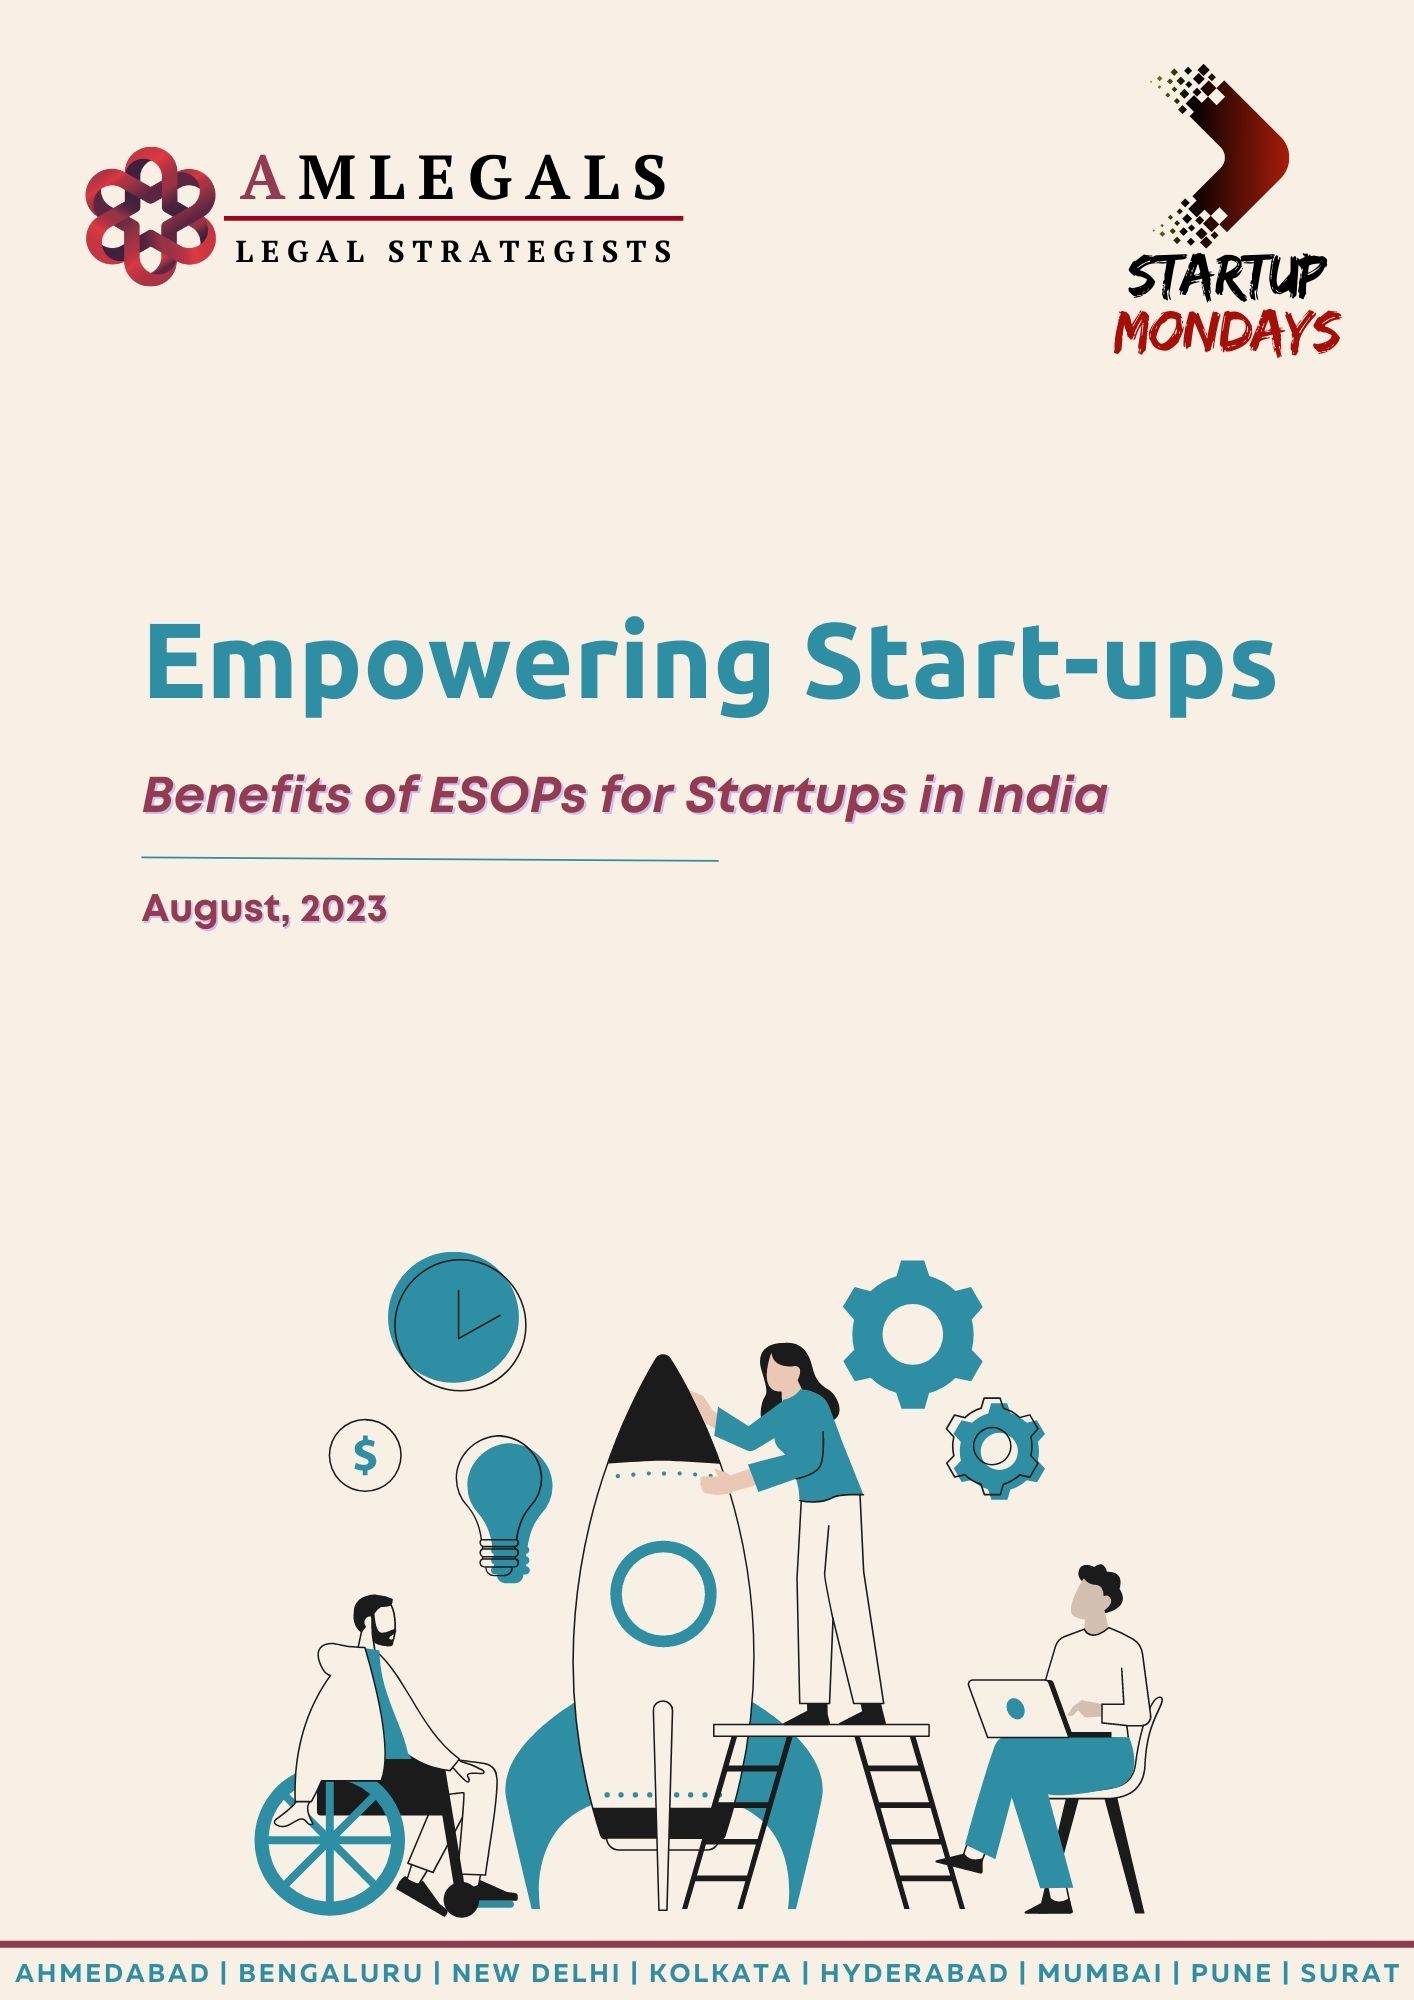 Benefits of ESOPs for Startups in India